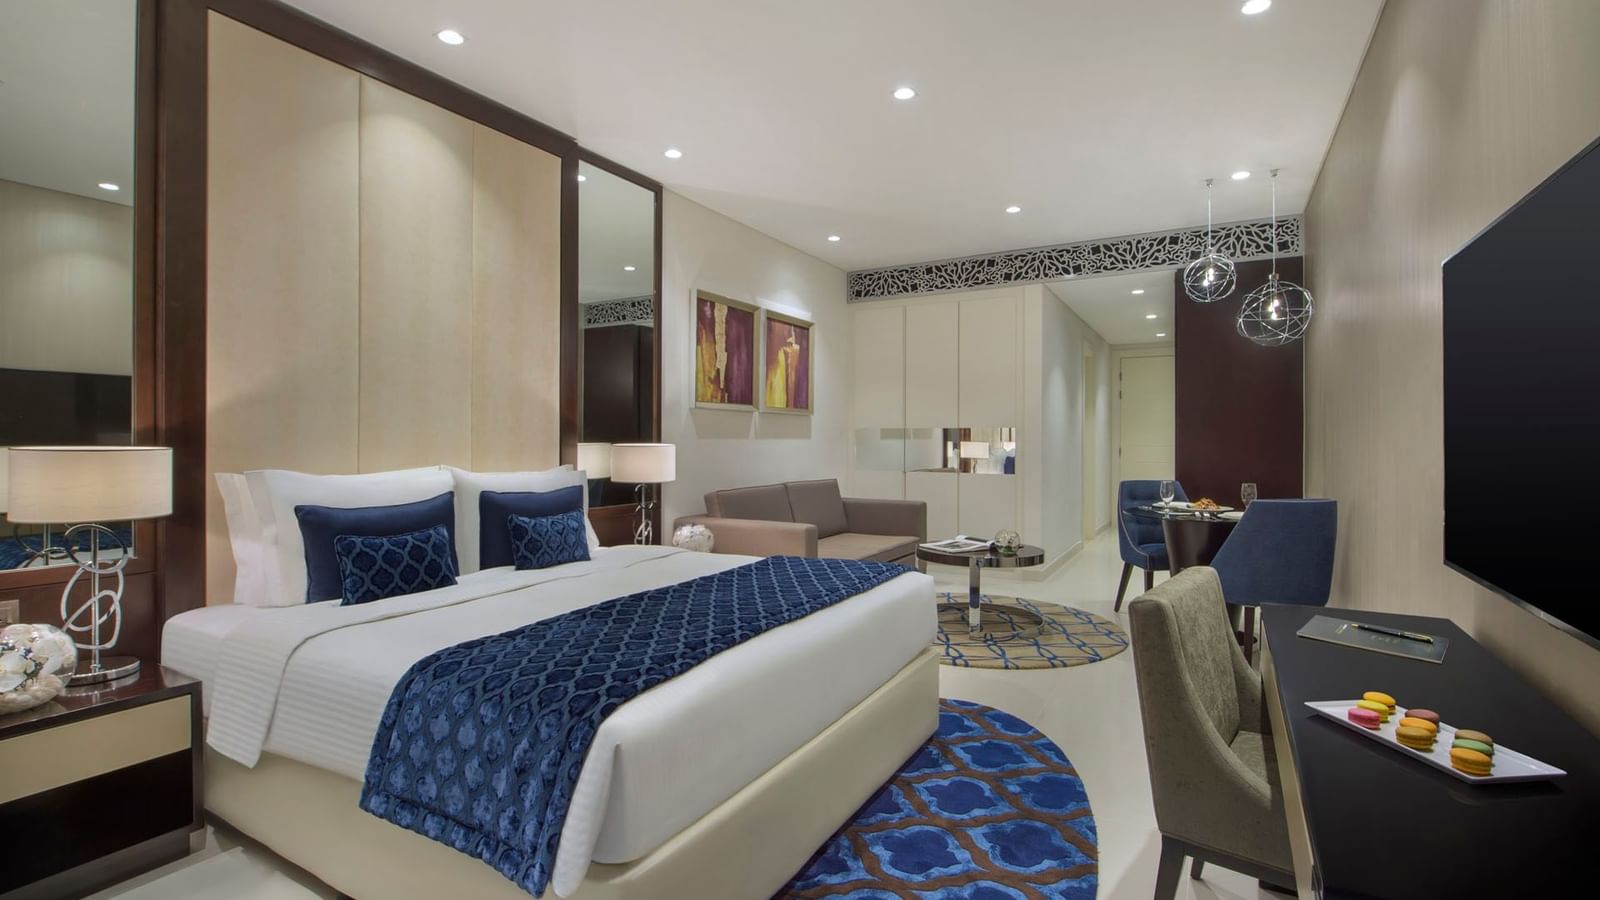 King-size bed, work desk & cozy couch in Deluxe Room at DAMAC Maison Distinction